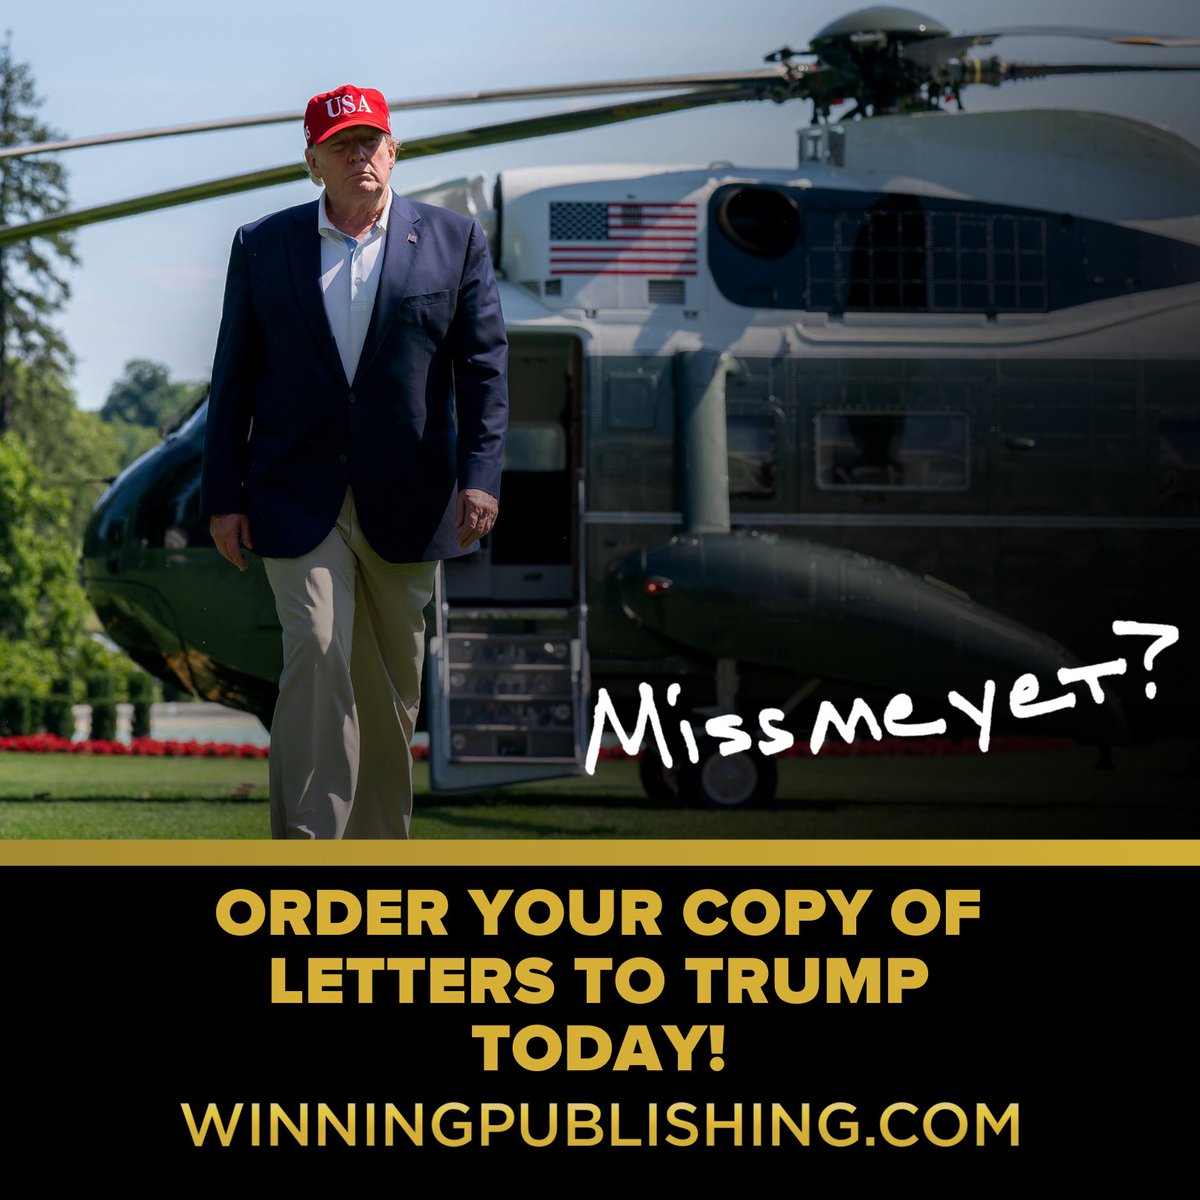 Miss him yet? Get his latest book LETTERS TO TRUMP today at WINNINGPUBLISHING.com!